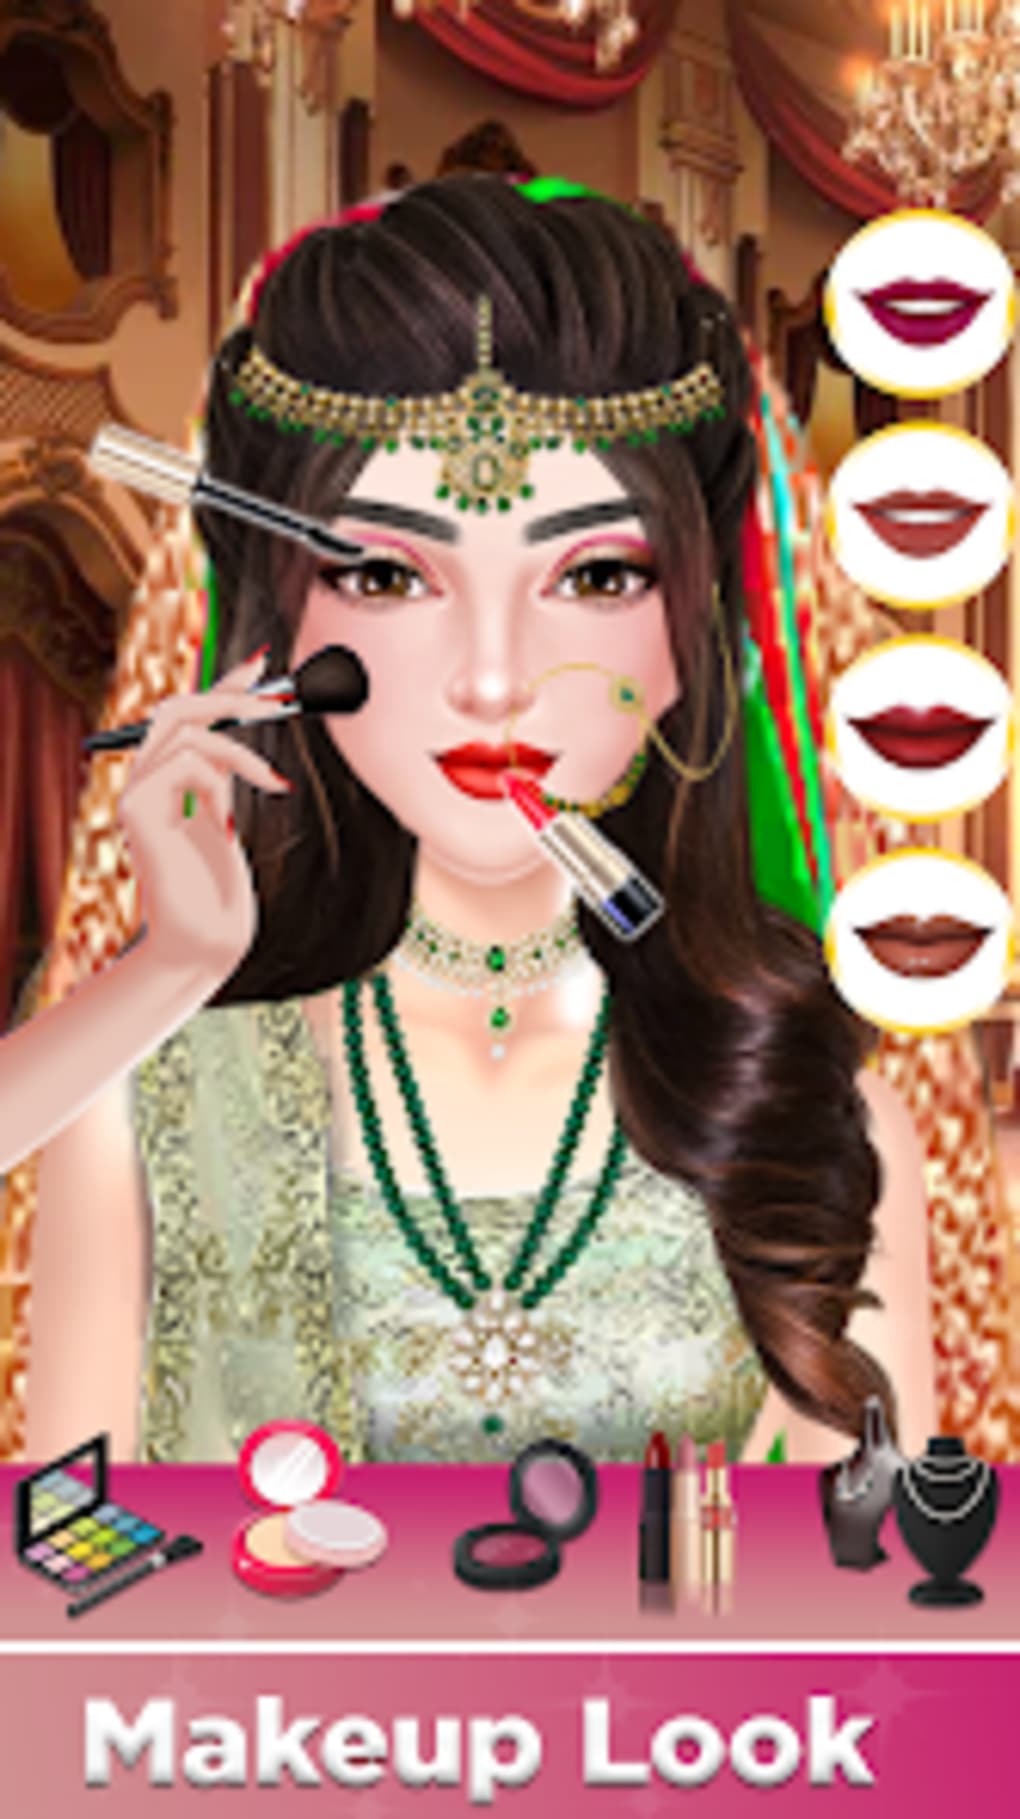 Royal Indian Western Makeup & Dressup Wedding Games-Dream Doll Decoration  and Stylist Salon Game-Makeup Artist-Wedding Dressup Game Makeover-Royal  Wedding Day-Wedding Games for Girls-FREE - Microsoft Apps